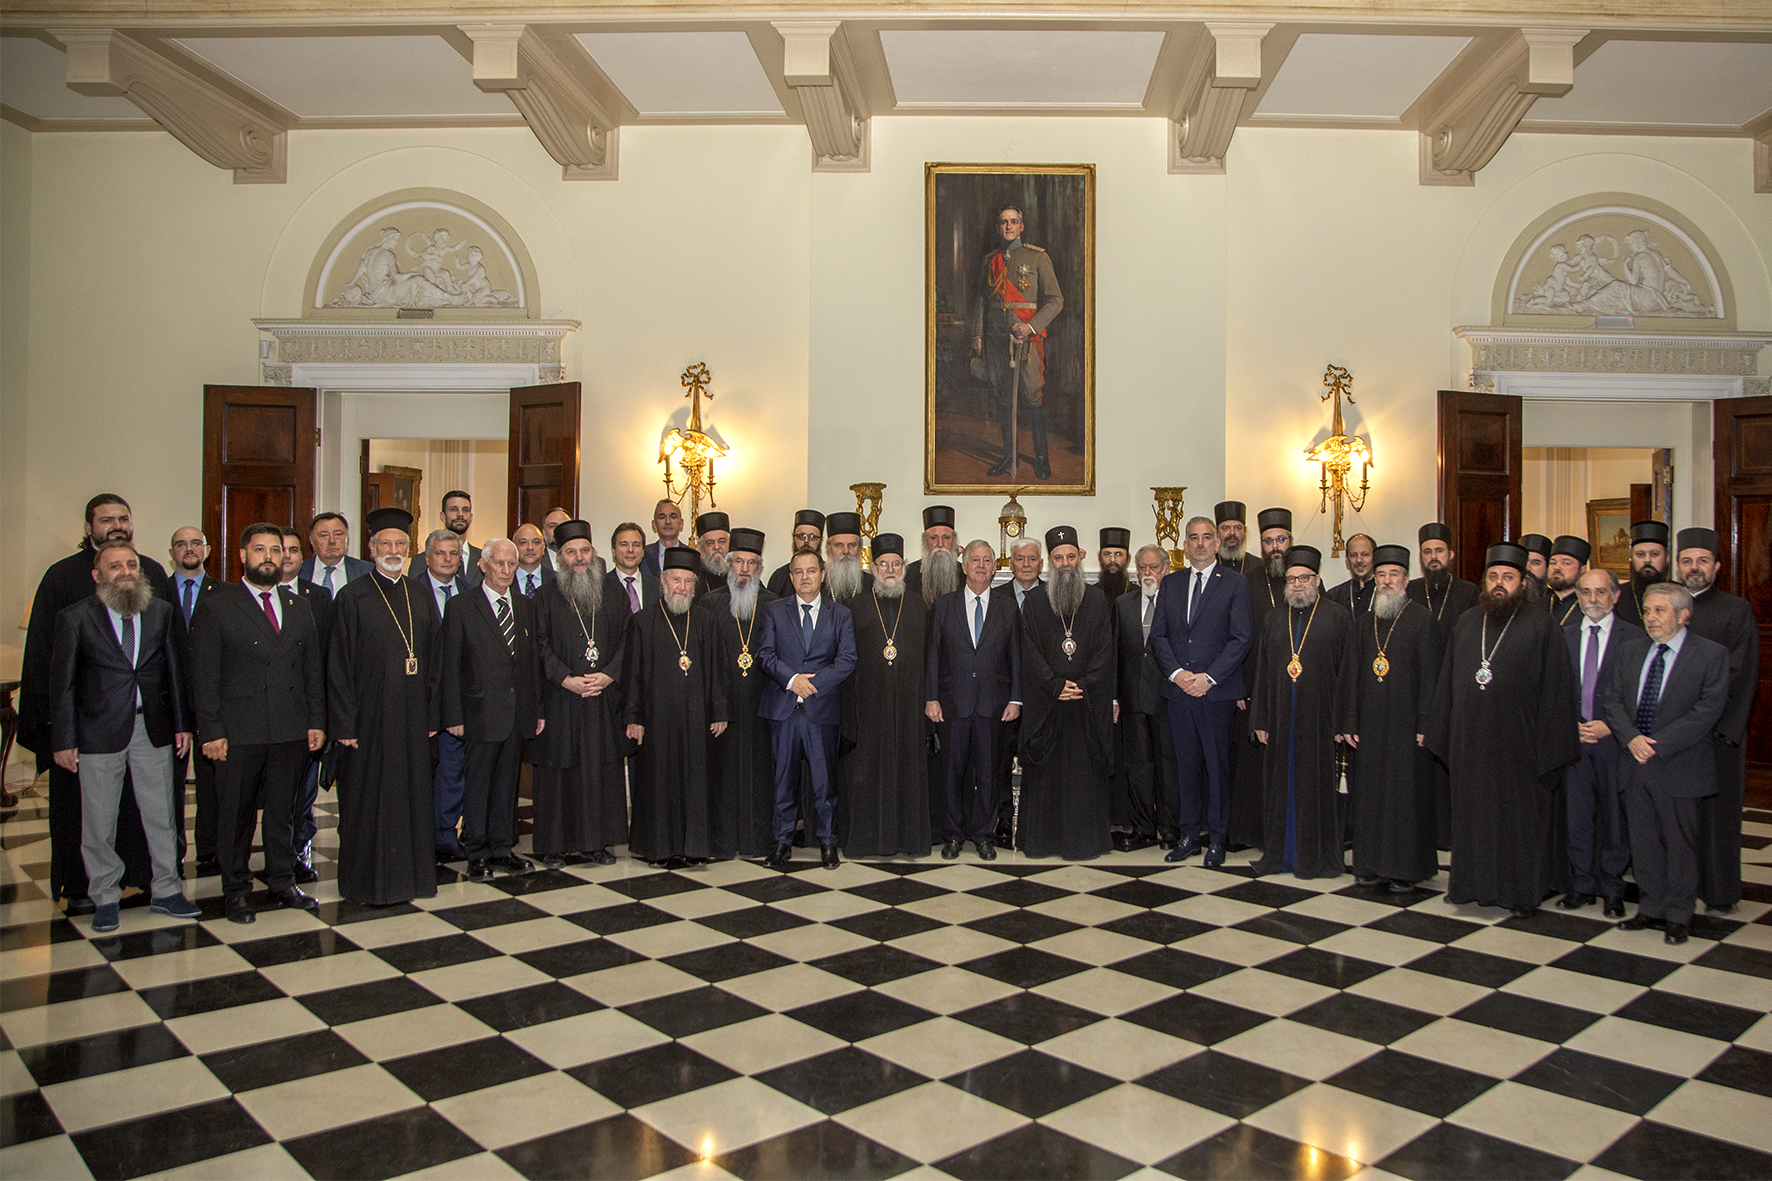 Dinner for the Holy Assembly of Bishops of the Serbian Orthodox Church at the White Palace